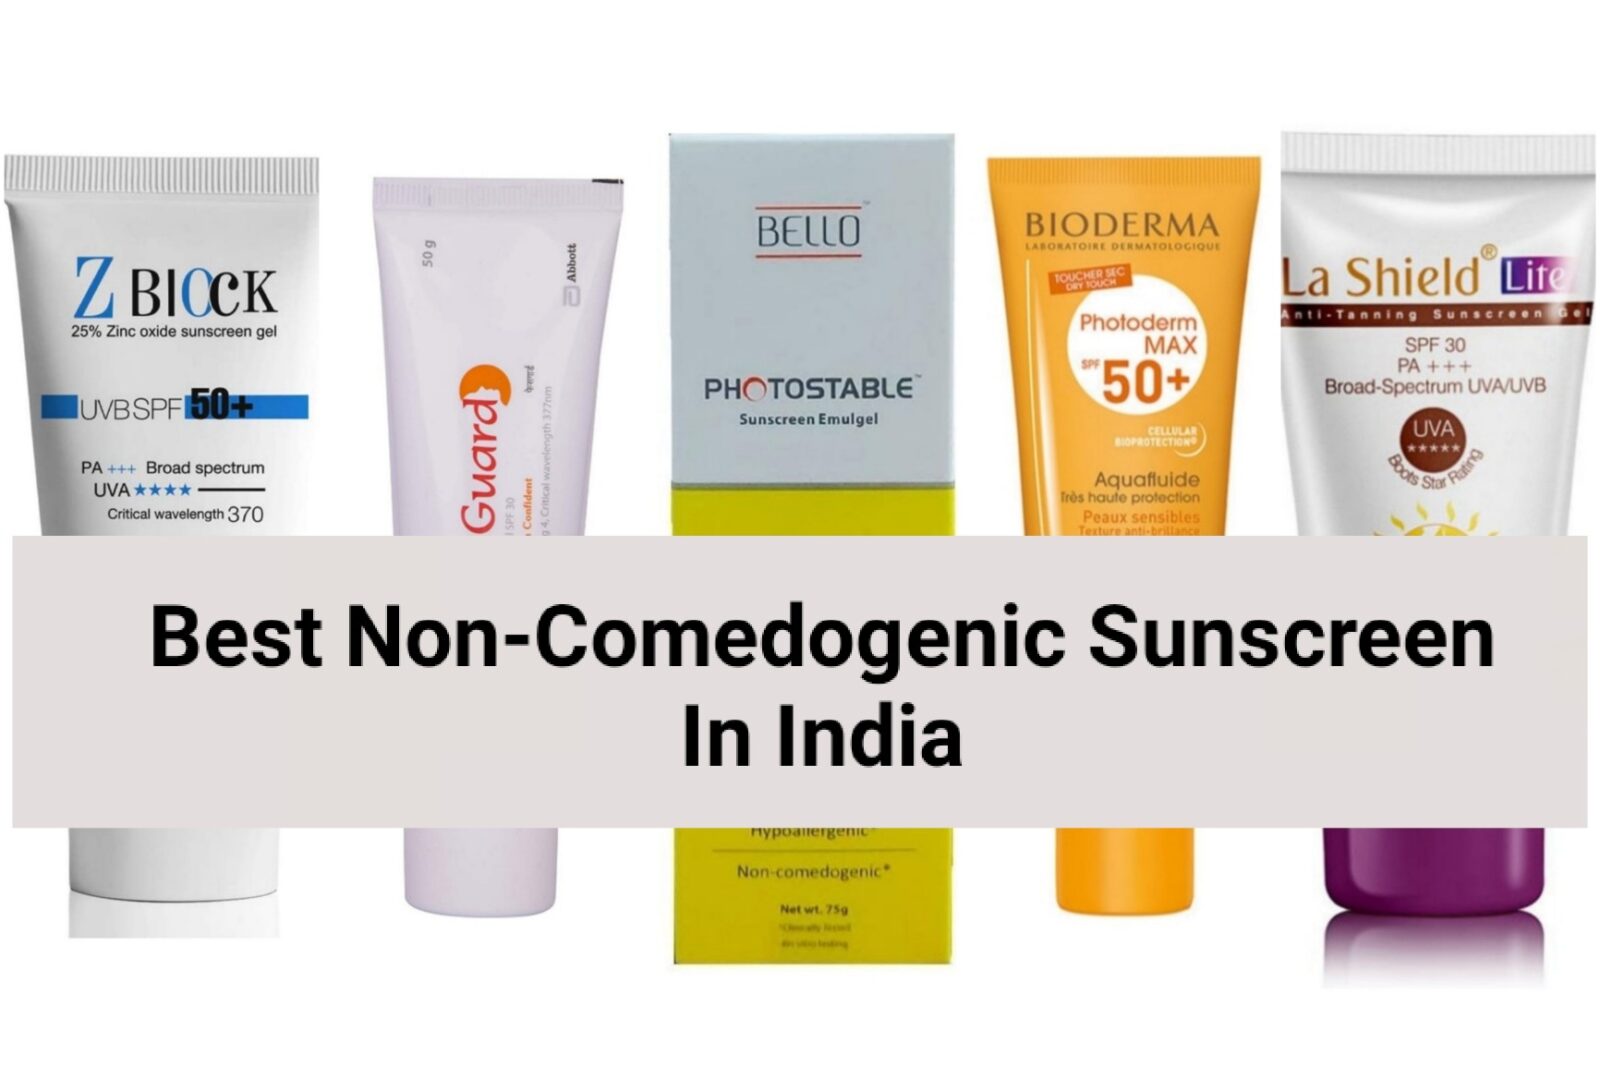 13 Best Non-Comedogenic Sunscreen In India For Every Skin Type